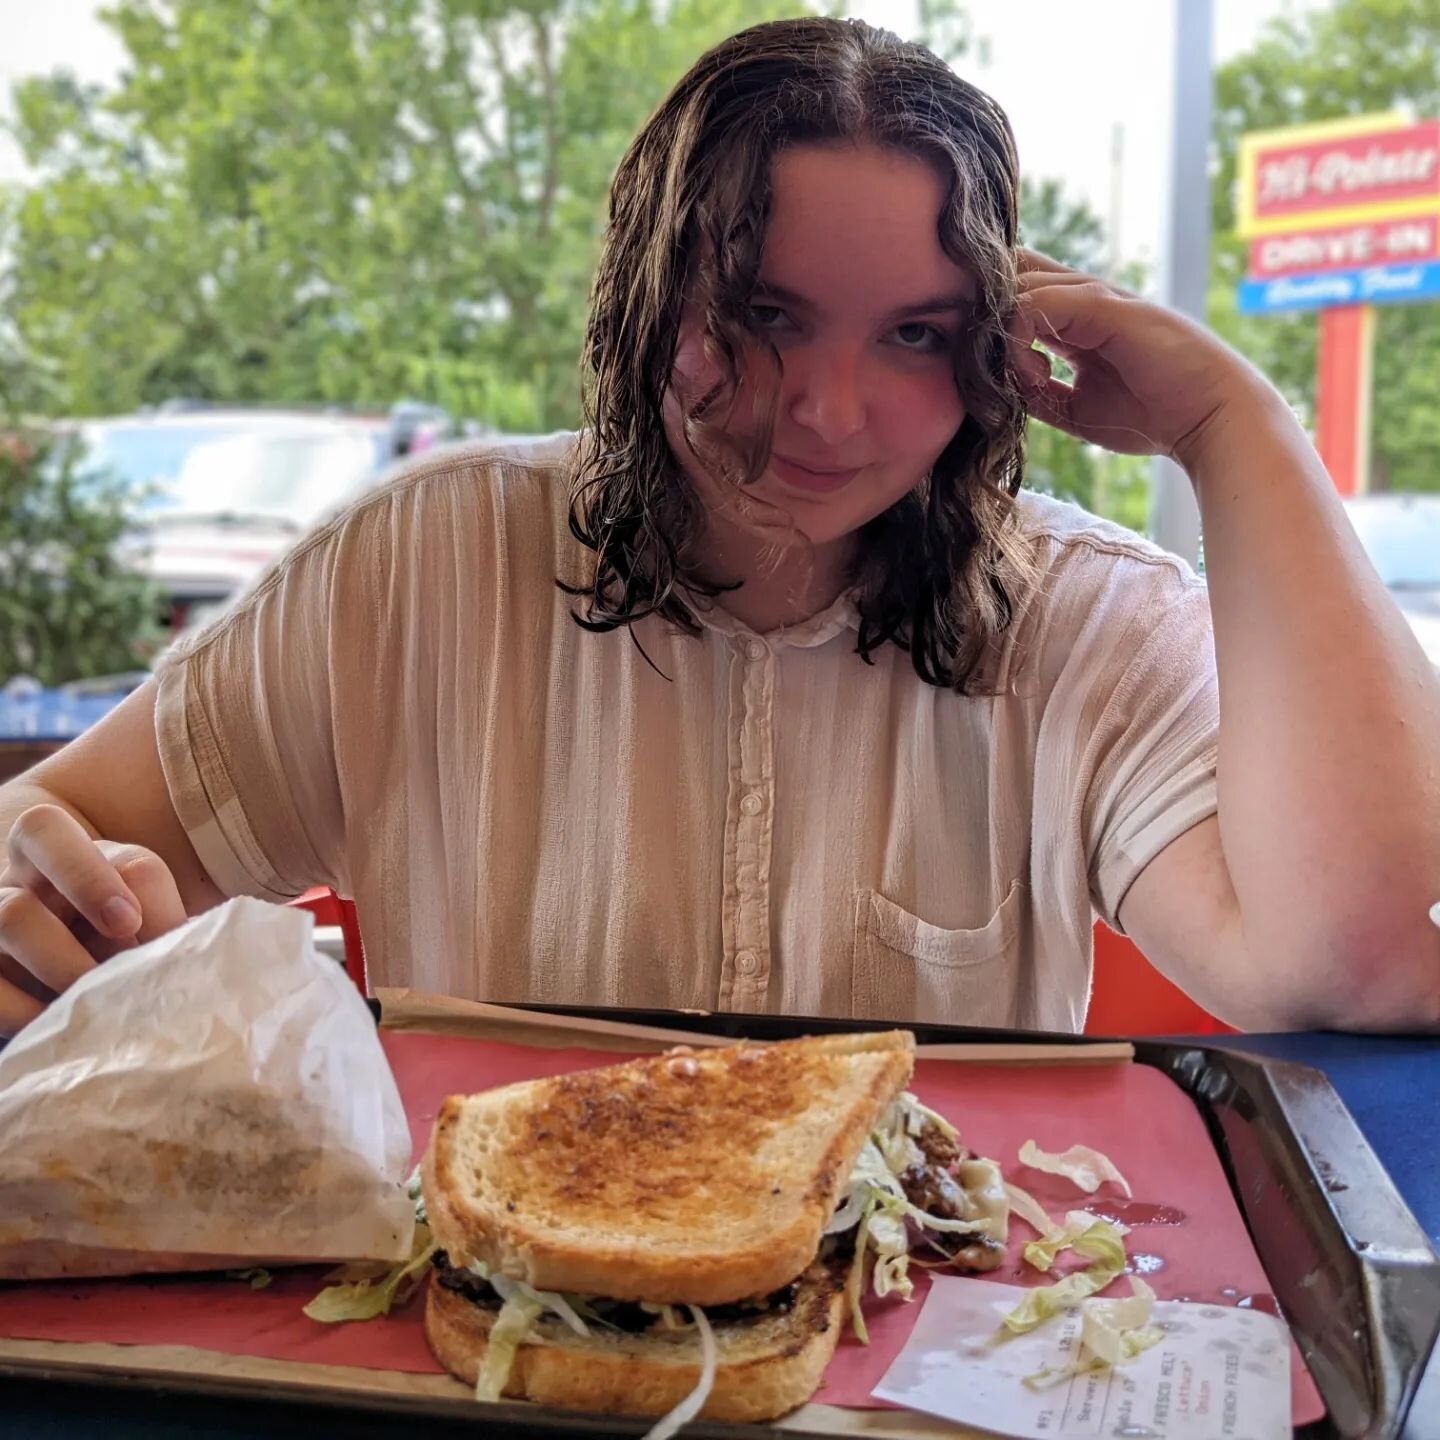 Went to the Hi Pointe Drive in, yesterday with my girlfriend @alyssaspecht20 and we had a great time. The burgers were good and the sweet potato tater tots were amazing. If you go though try to find a time where they're not super busy because it gets